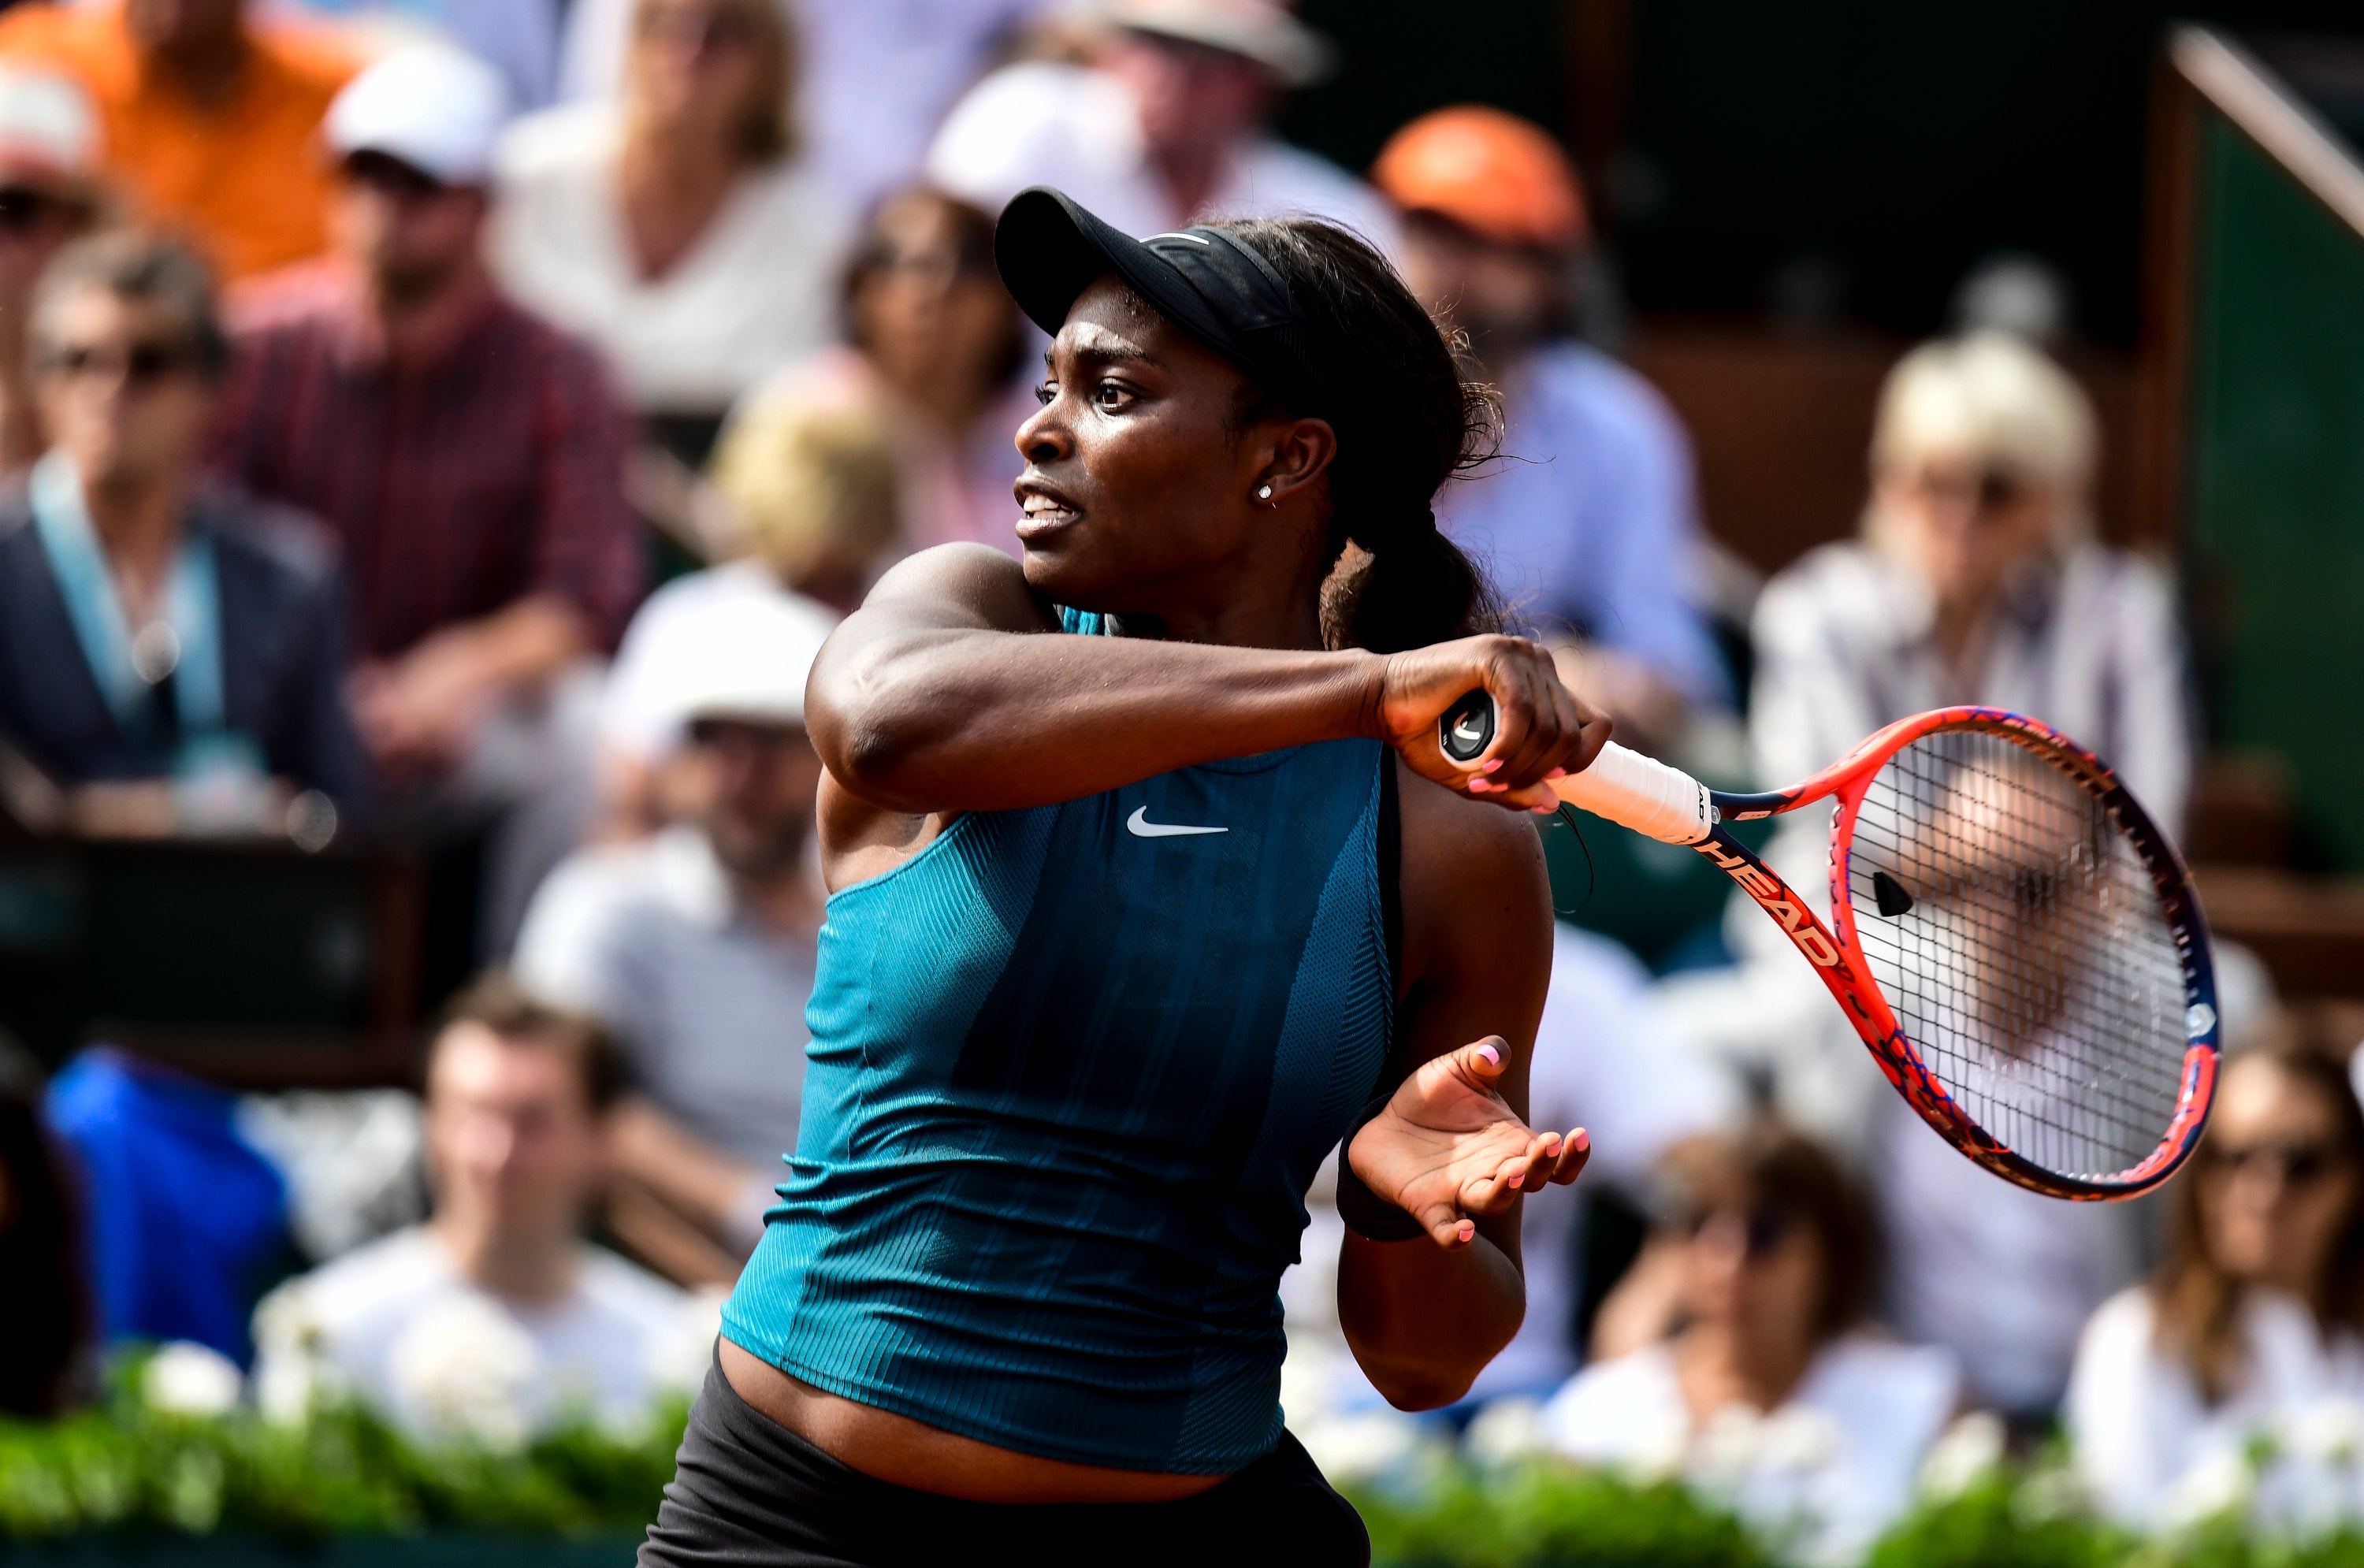 Tennis Champ Sloane Stephens Remains A Class Act Following French Open Defeat By Romania's Simona Halep
